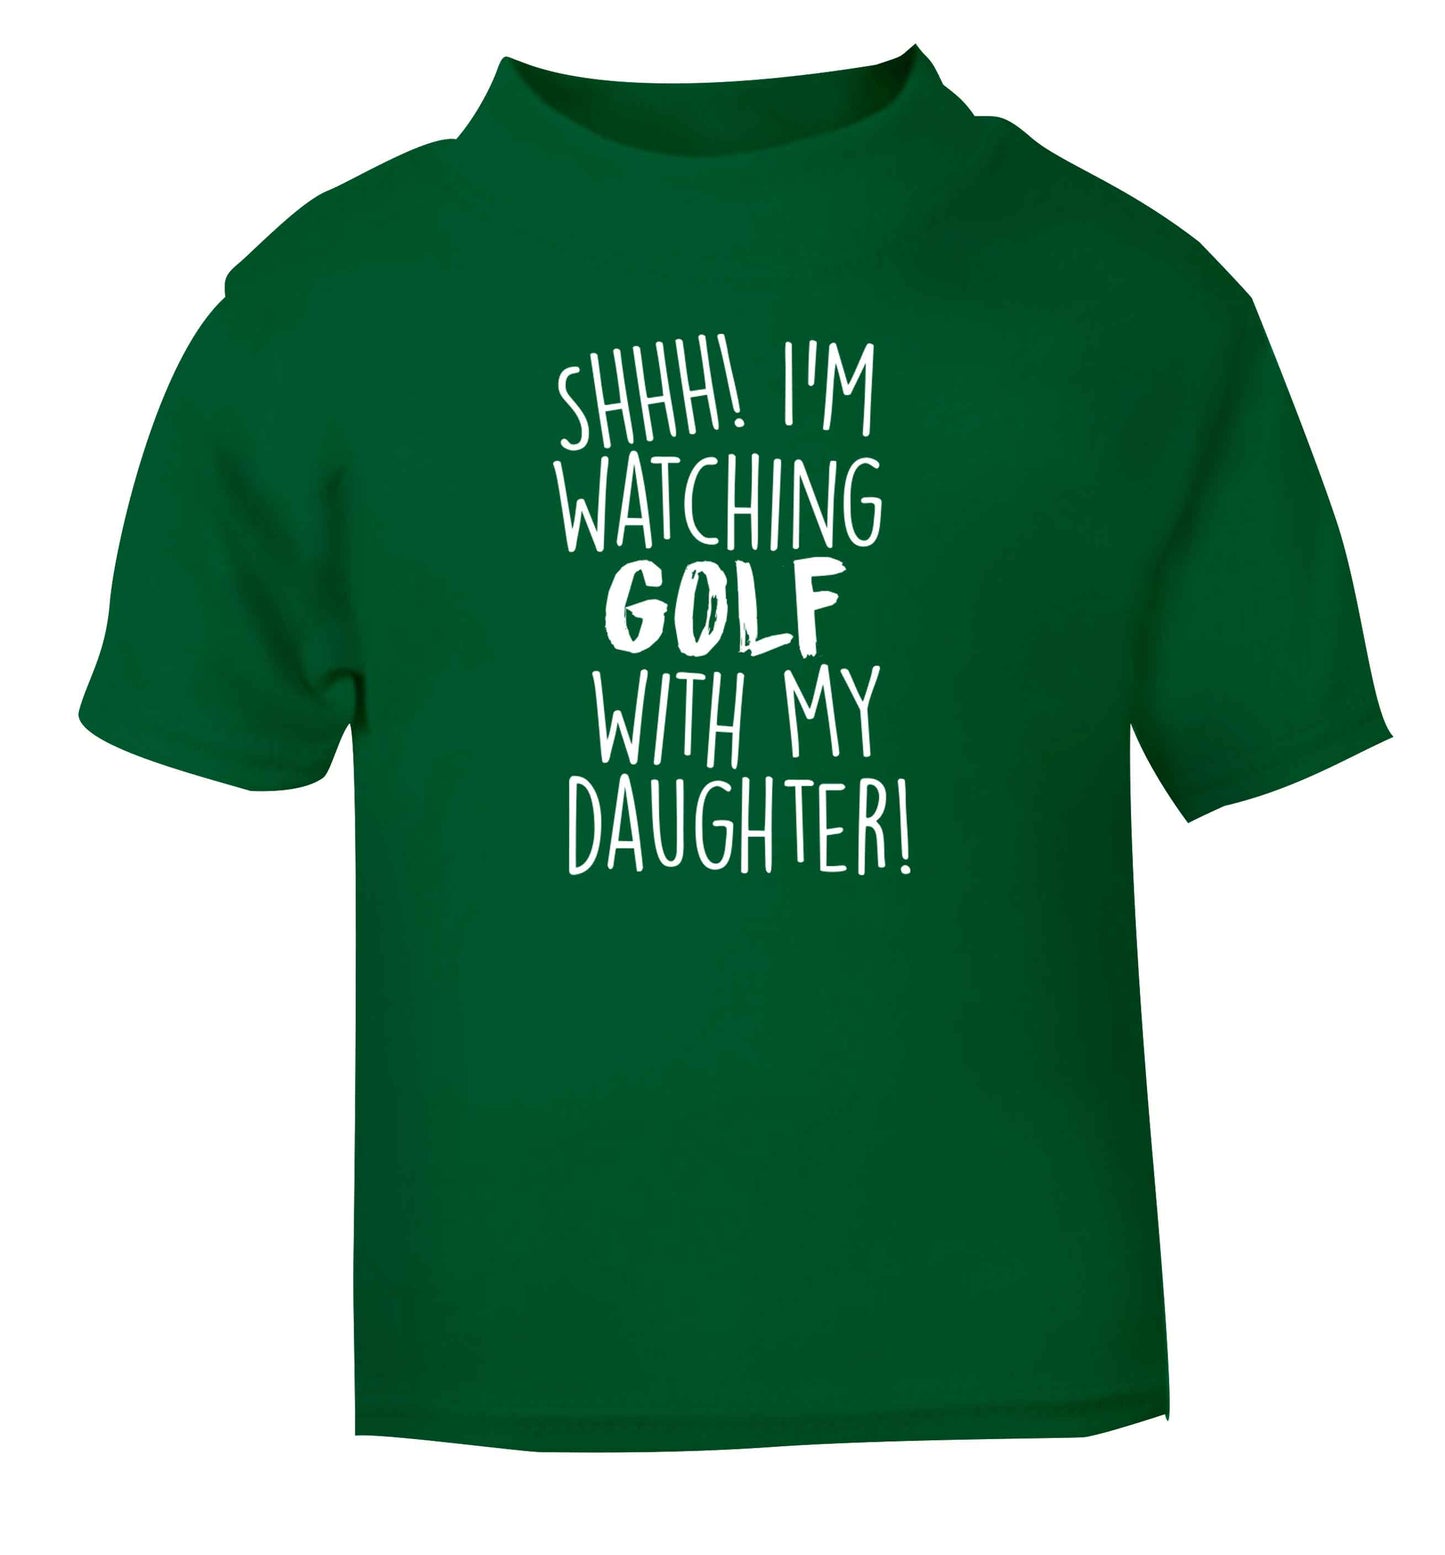 Shh I'm watching golf with my daughter green Baby Toddler Tshirt 2 Years